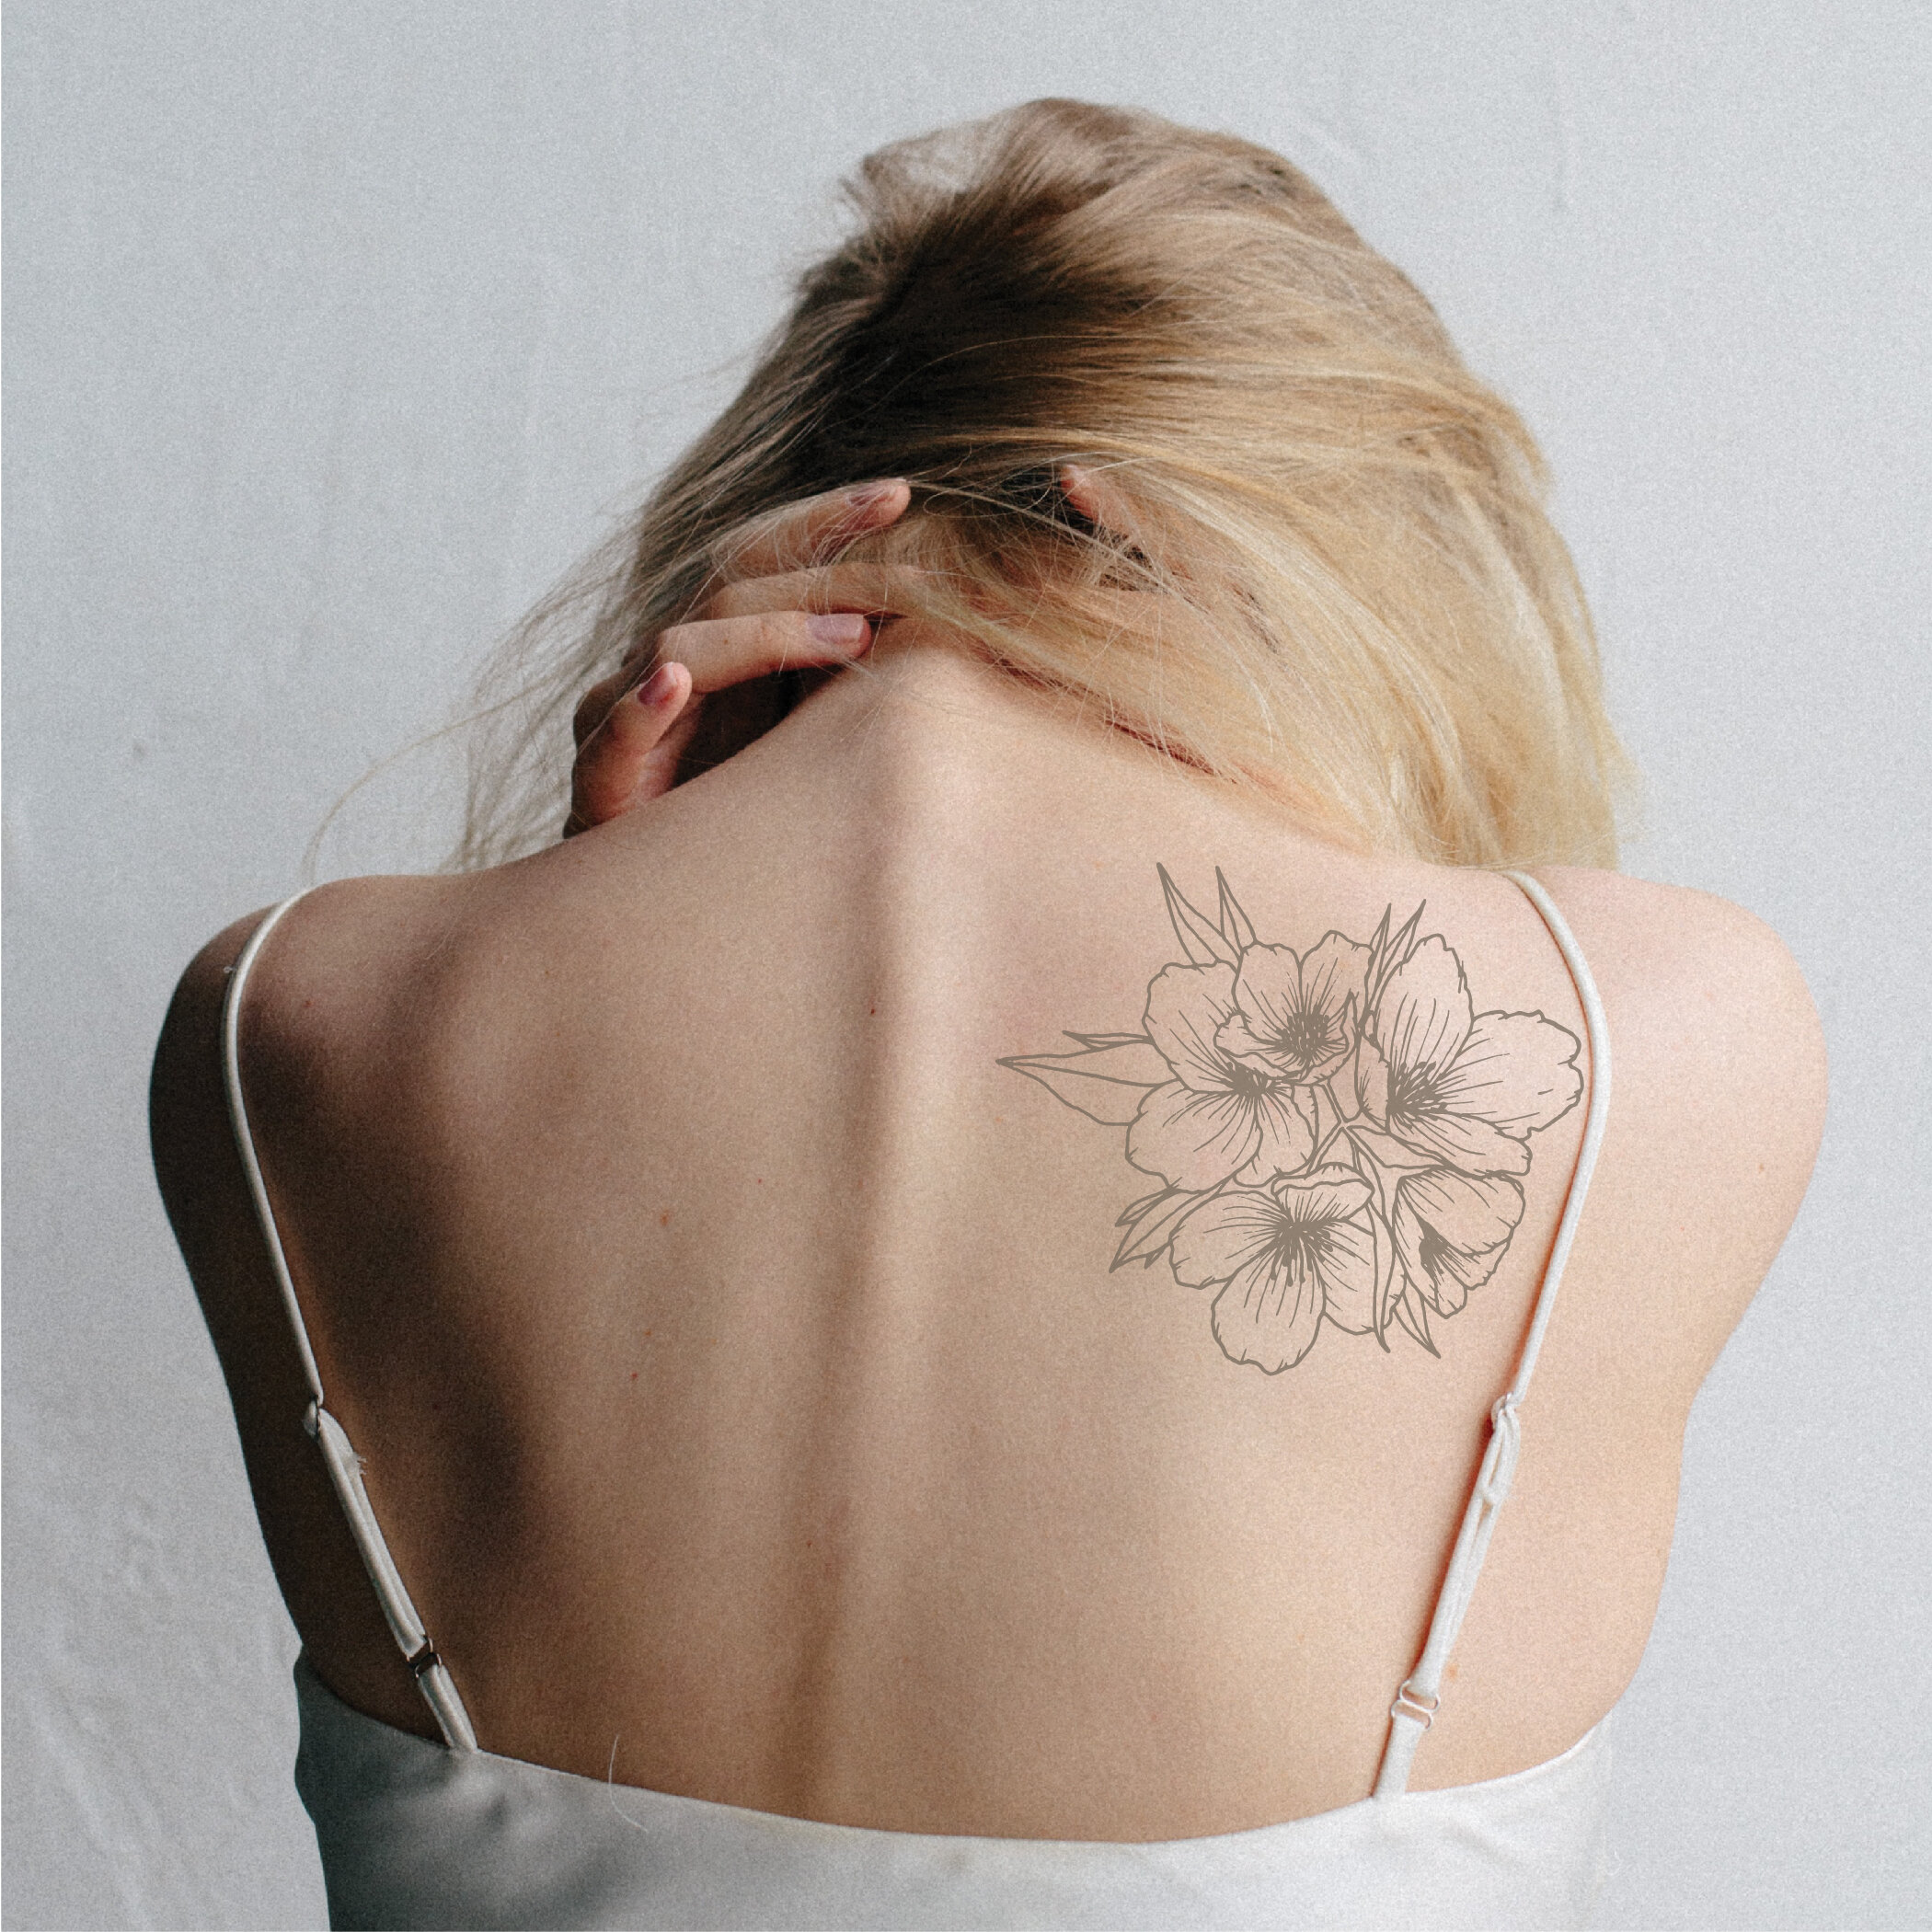 35 Shoulder Tattoos for Women That Celebrate Womanhood and Strength   Psycho Tats